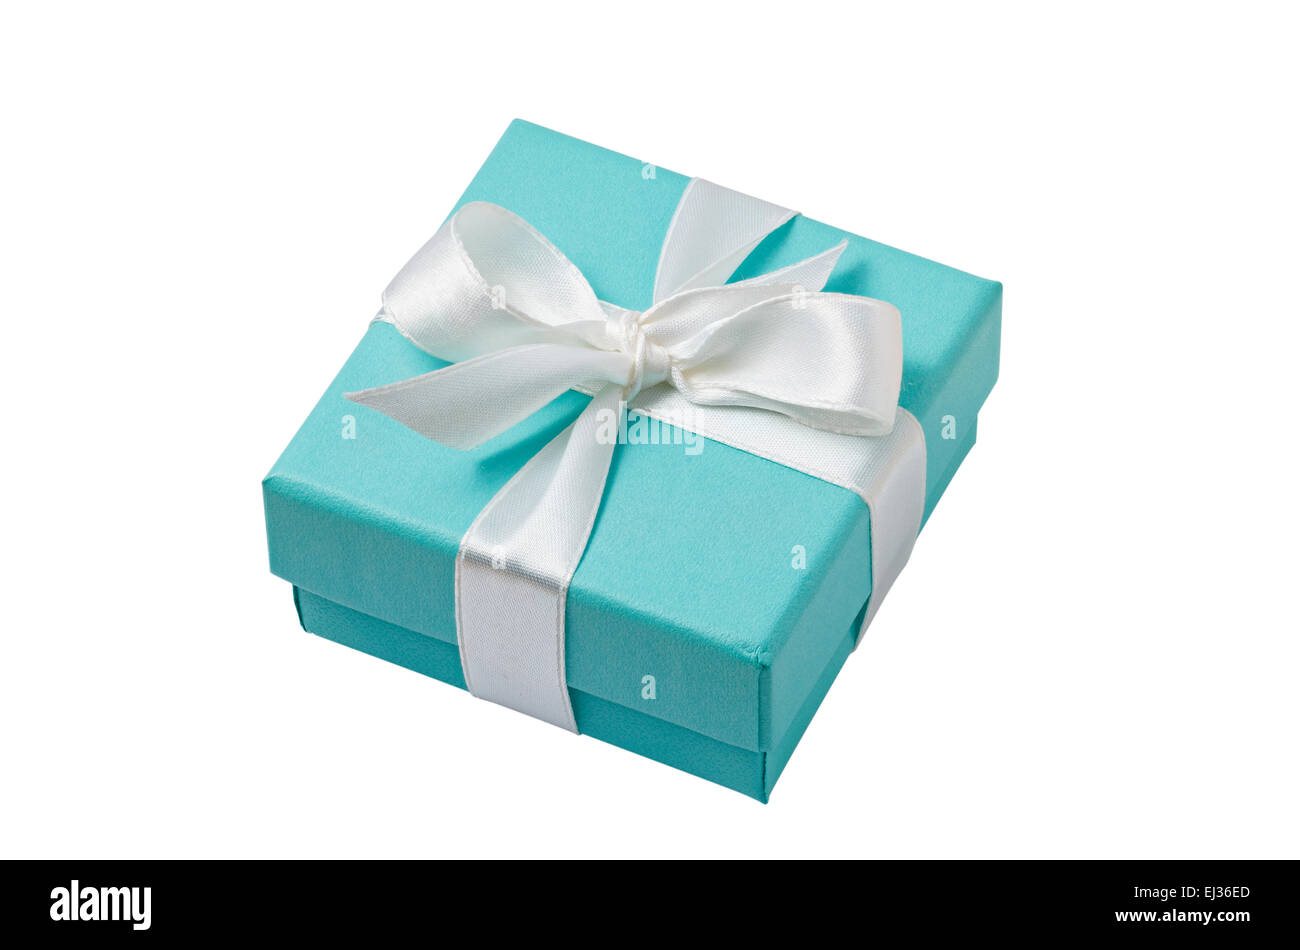 Tiffany Box High Resolution Stock Photography and Images - Alamy